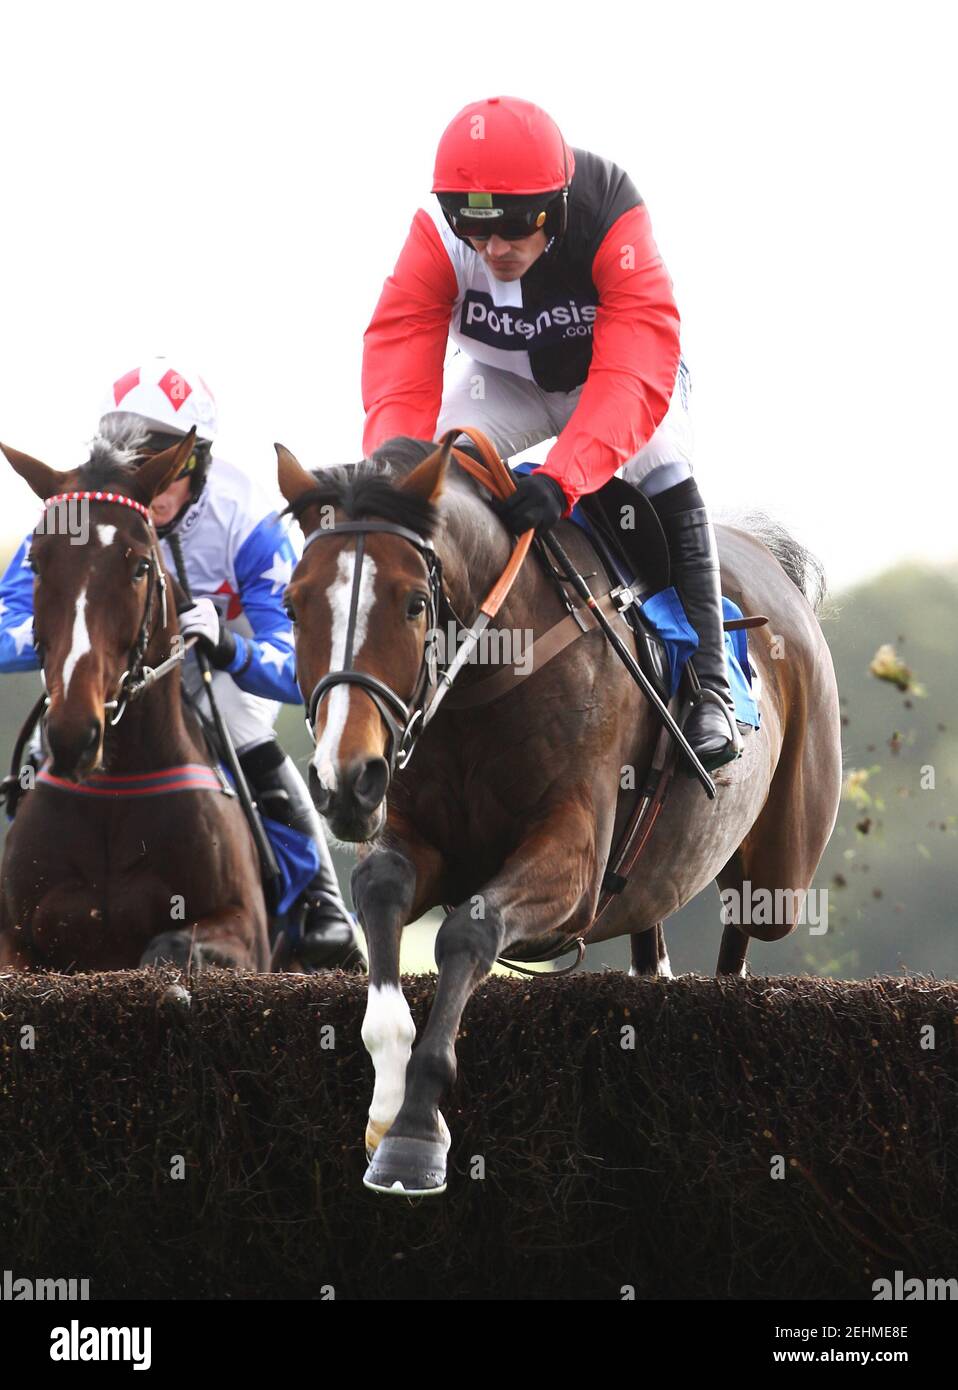 Horse Racing - Exeter - 19/10/10  Celestial Halo ridden by Ruby Walsh in action during the 15.10 Best Mate Beginners' Chase  Mandatory Credit: Action Images / Julian Herbert  Livepic Stock Photo